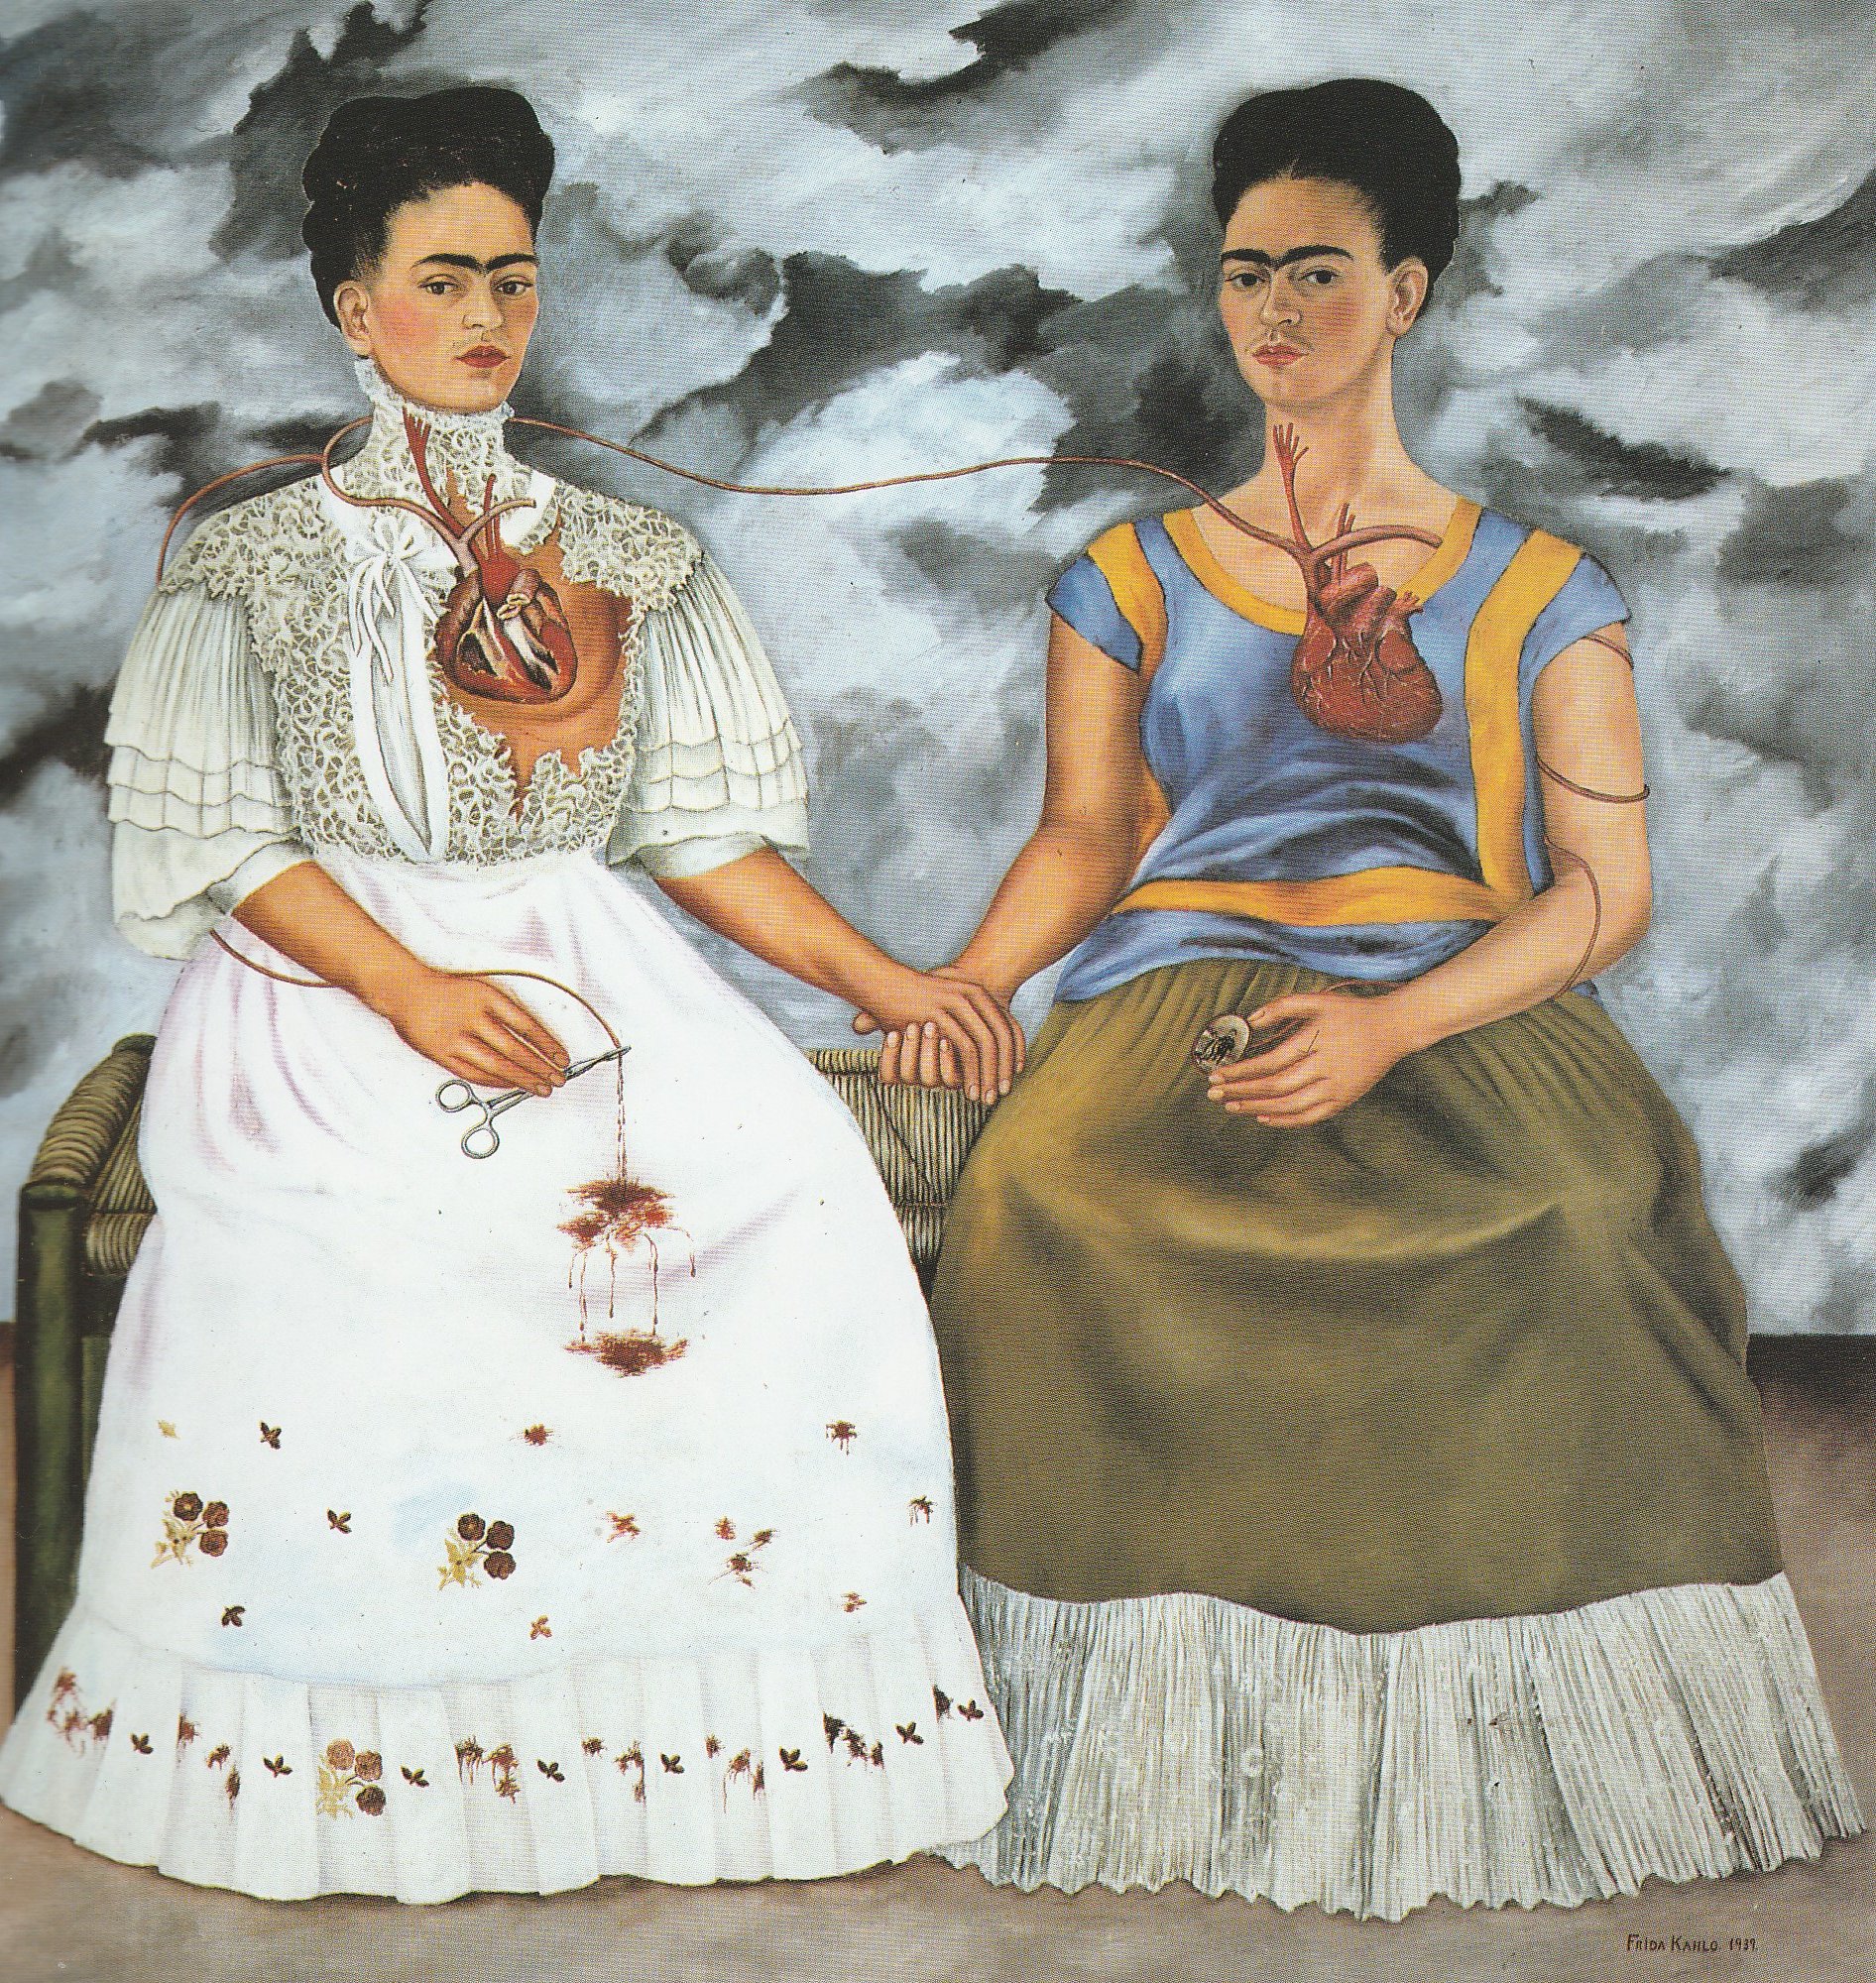 The Two Fridas -1939